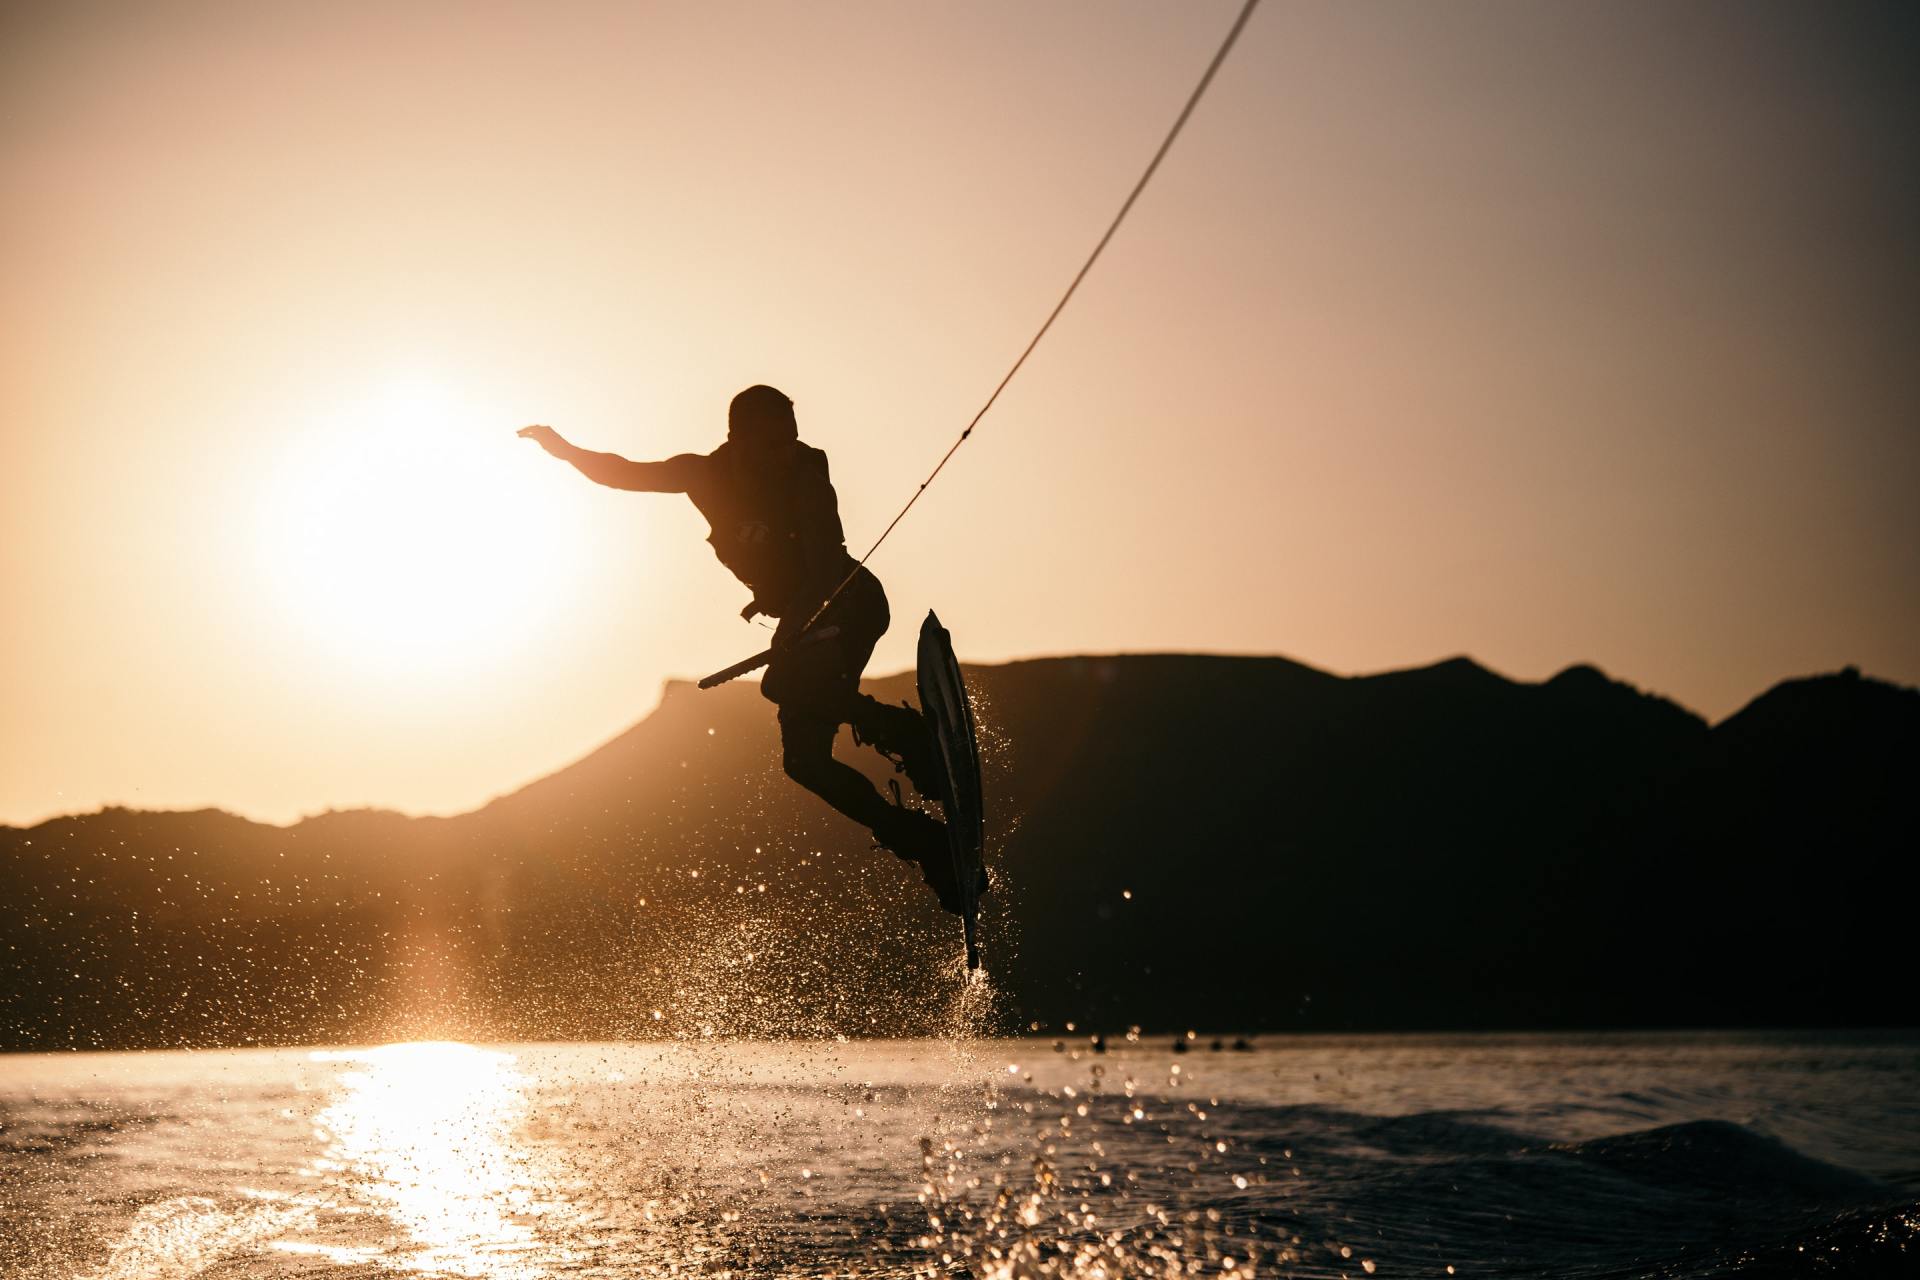 A man is jumping in the air while wakeboarding on a lake at sunset.